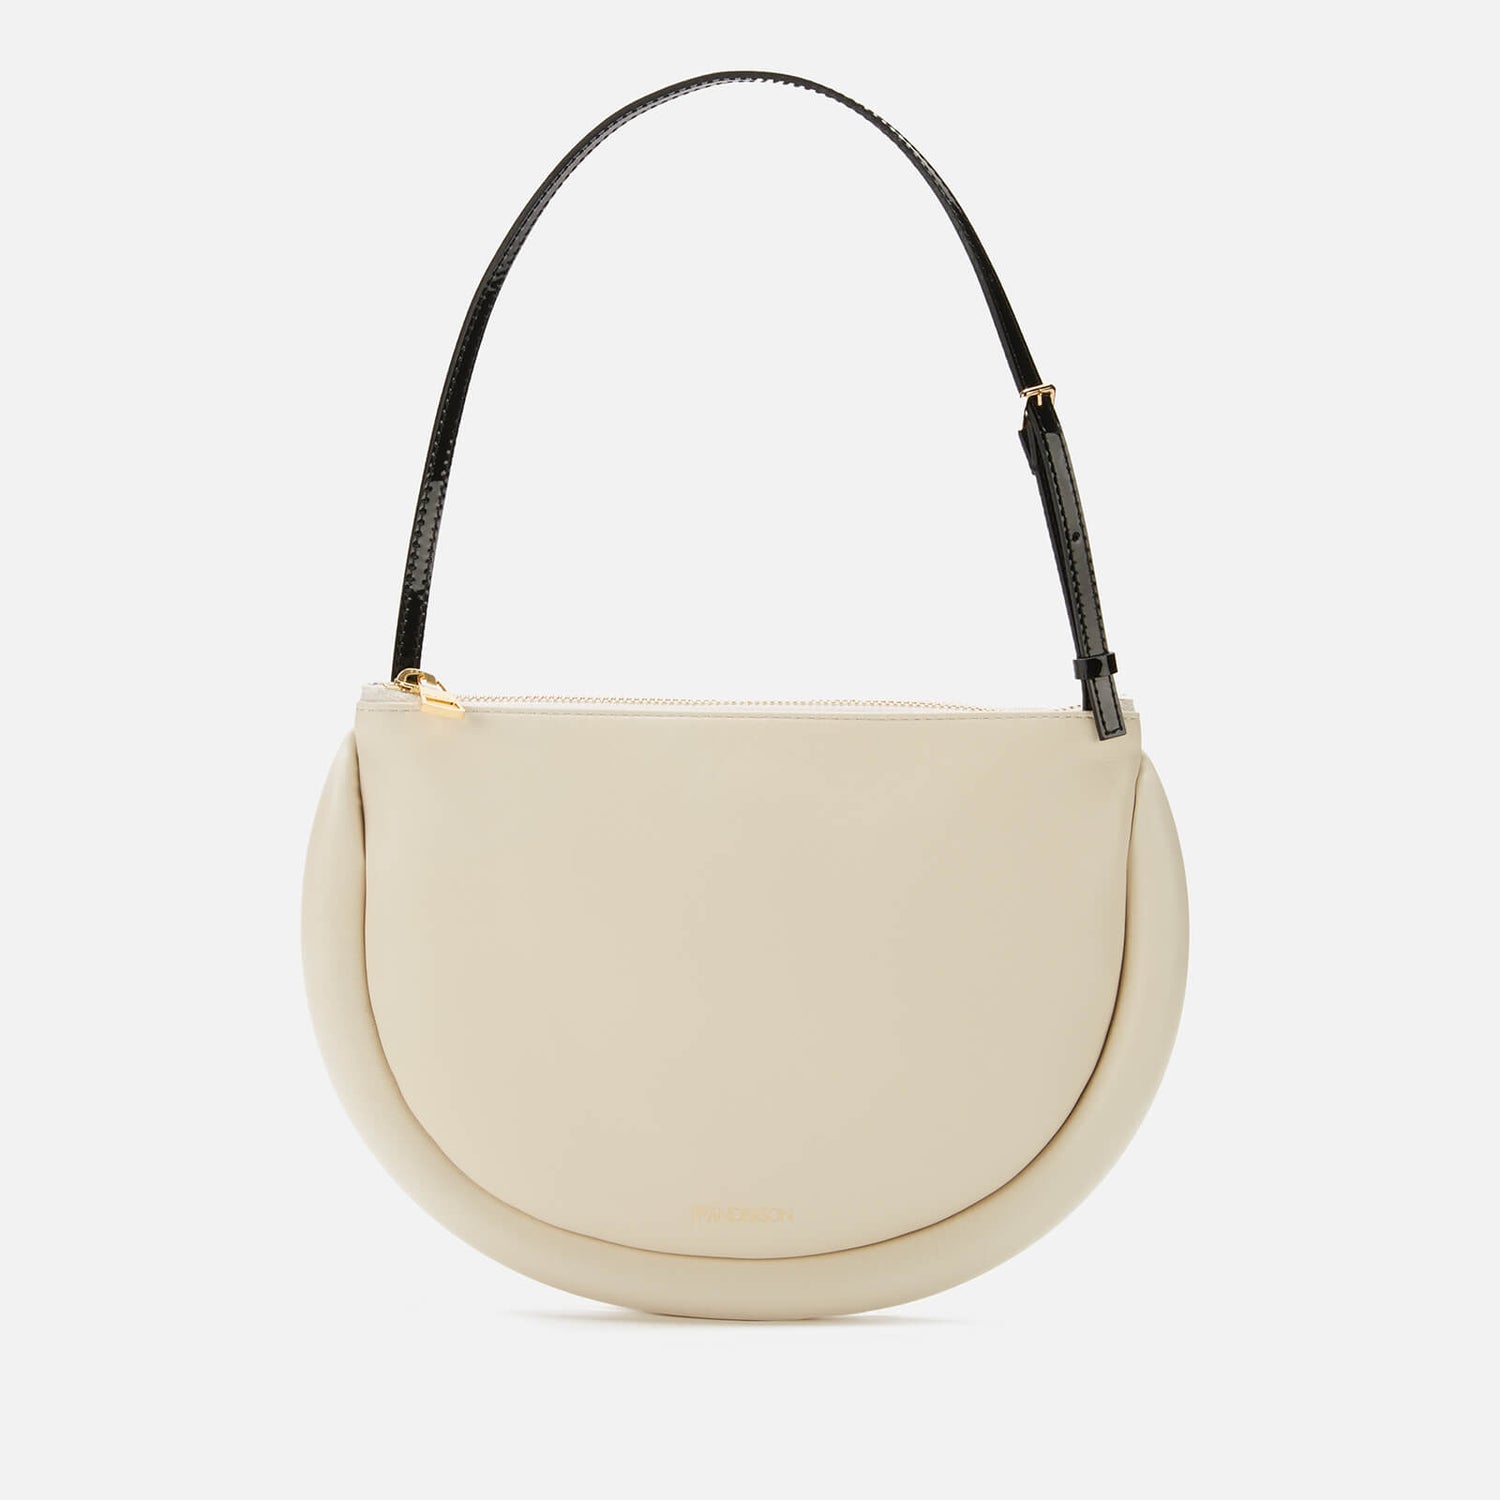 JW Anderson Women's The Bumpermoon Shoulder Bag - Off White/Black